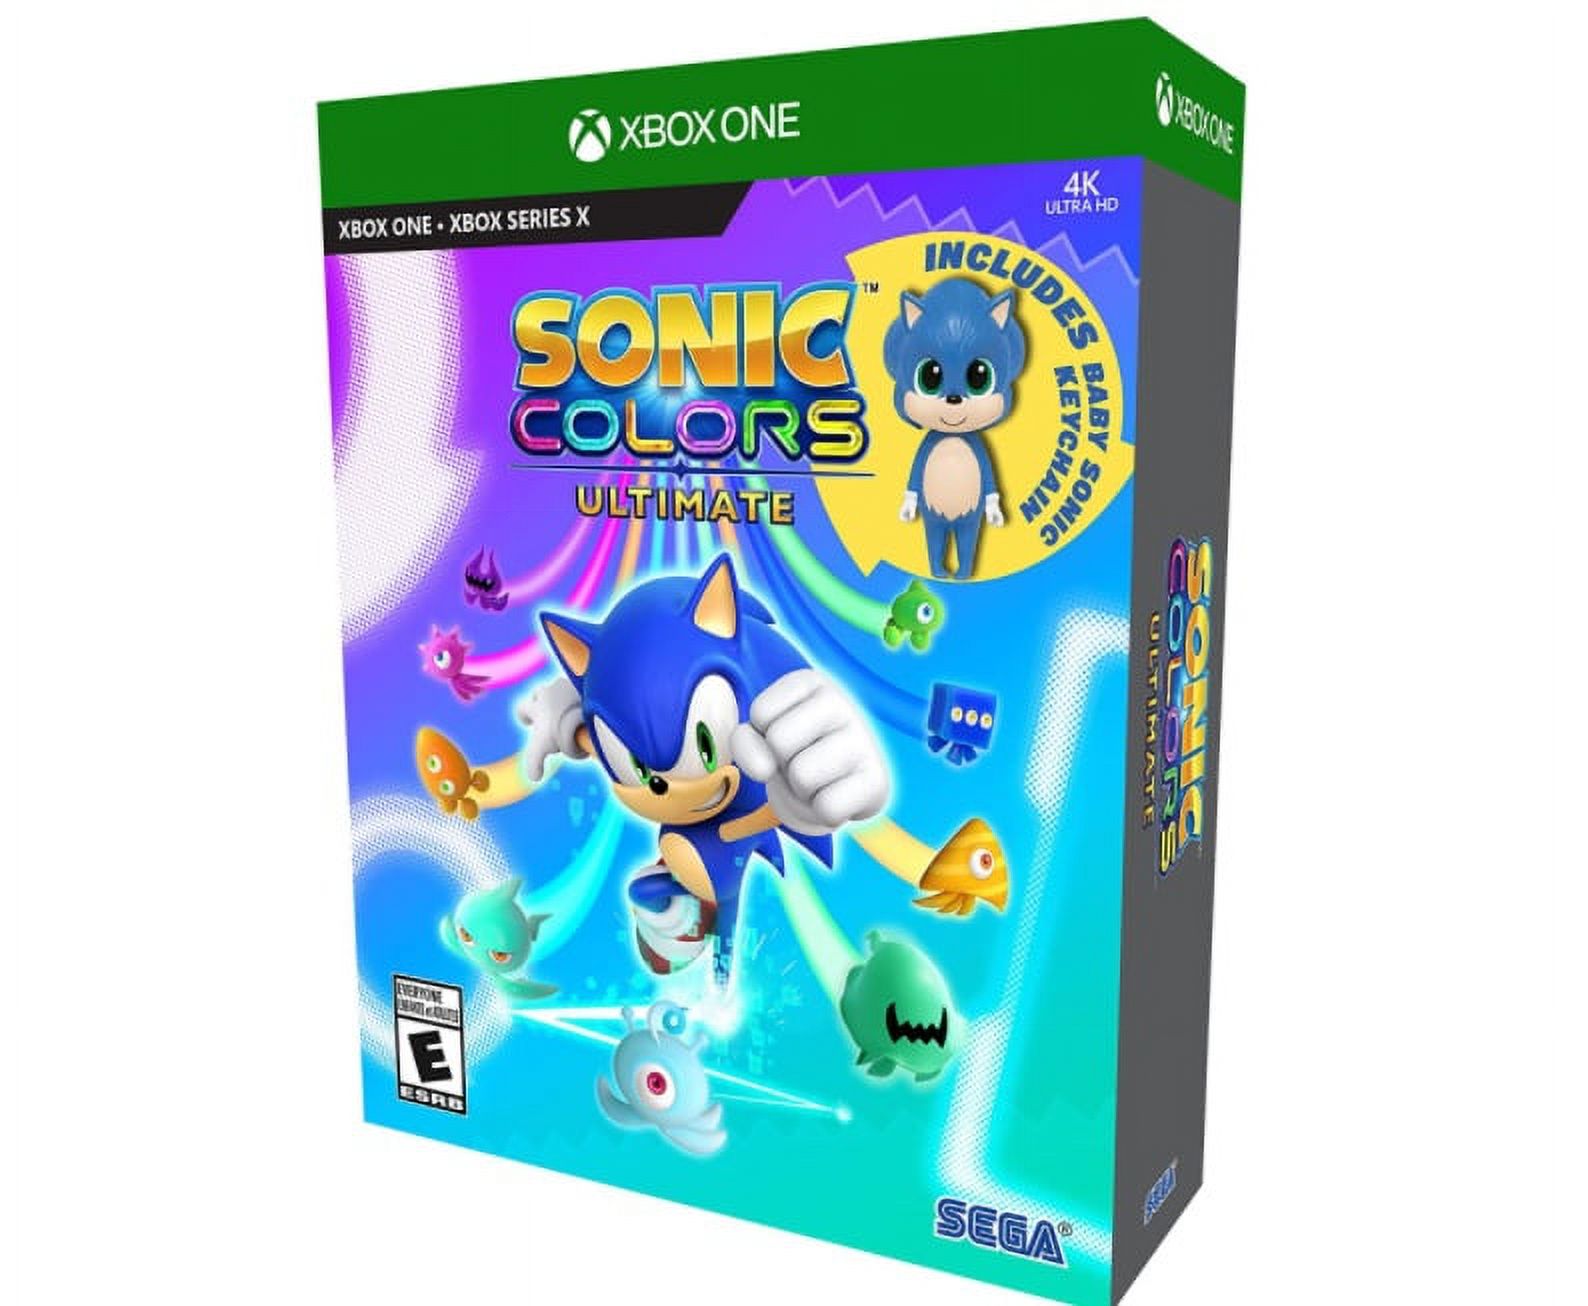 Sonic Colors Ultimate, Xbox One - image 1 of 3